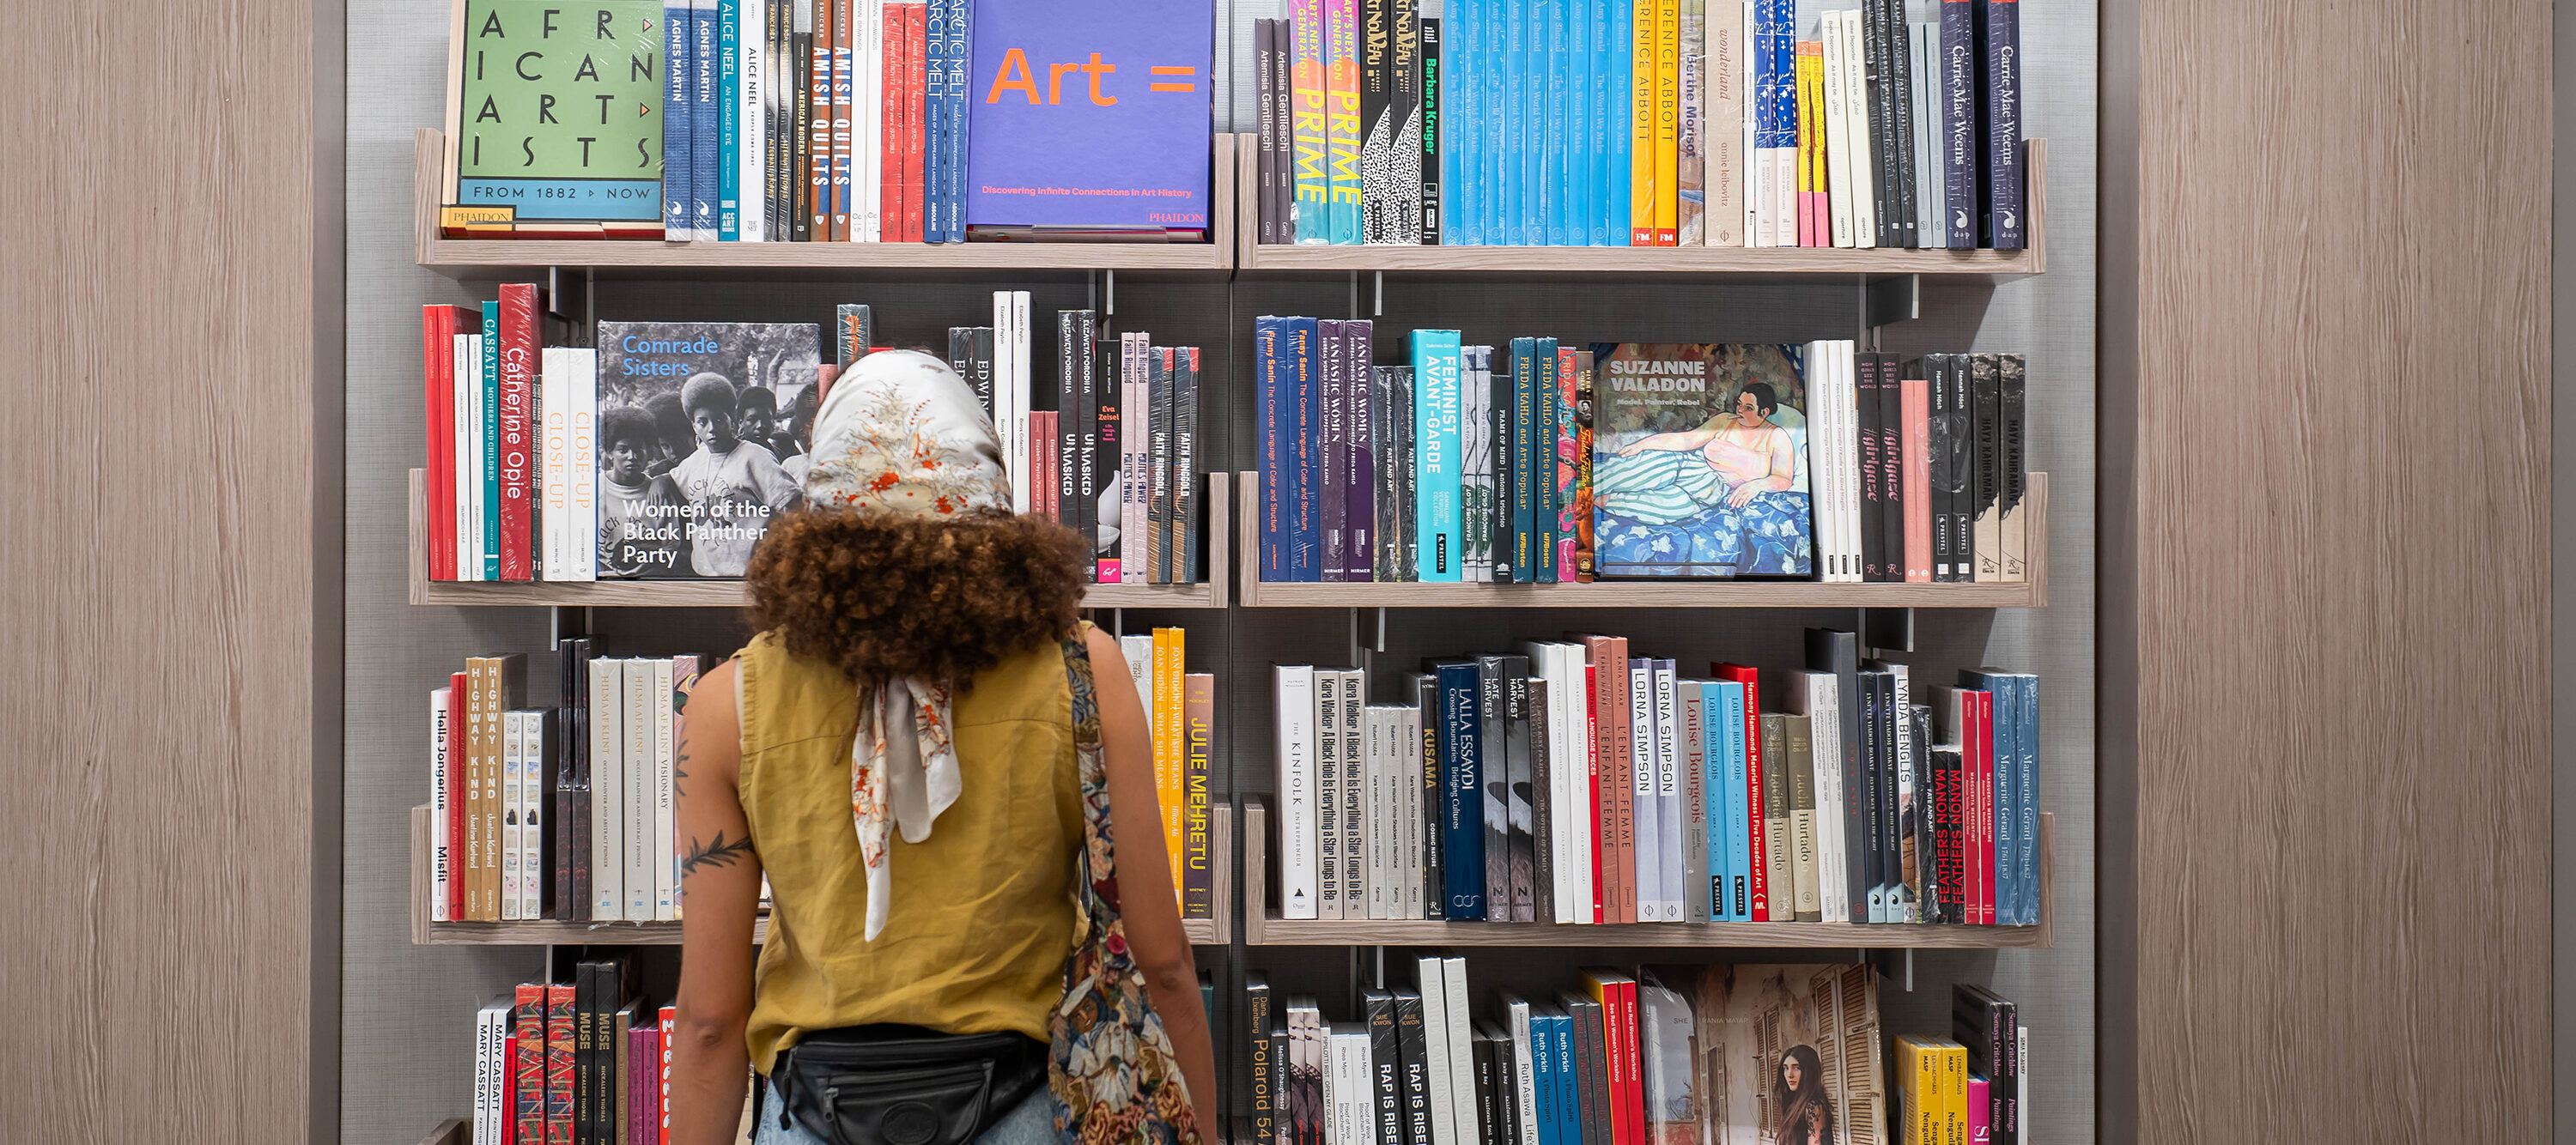 A visitor with medium skin tone and brown curly hair wearing a white and red floral head scarf, ochre sleeveless shirt, black backwards fanny pack, multicolored tote bag, and jeans stands facing a large floating bookcase filled with art books and catalogues.